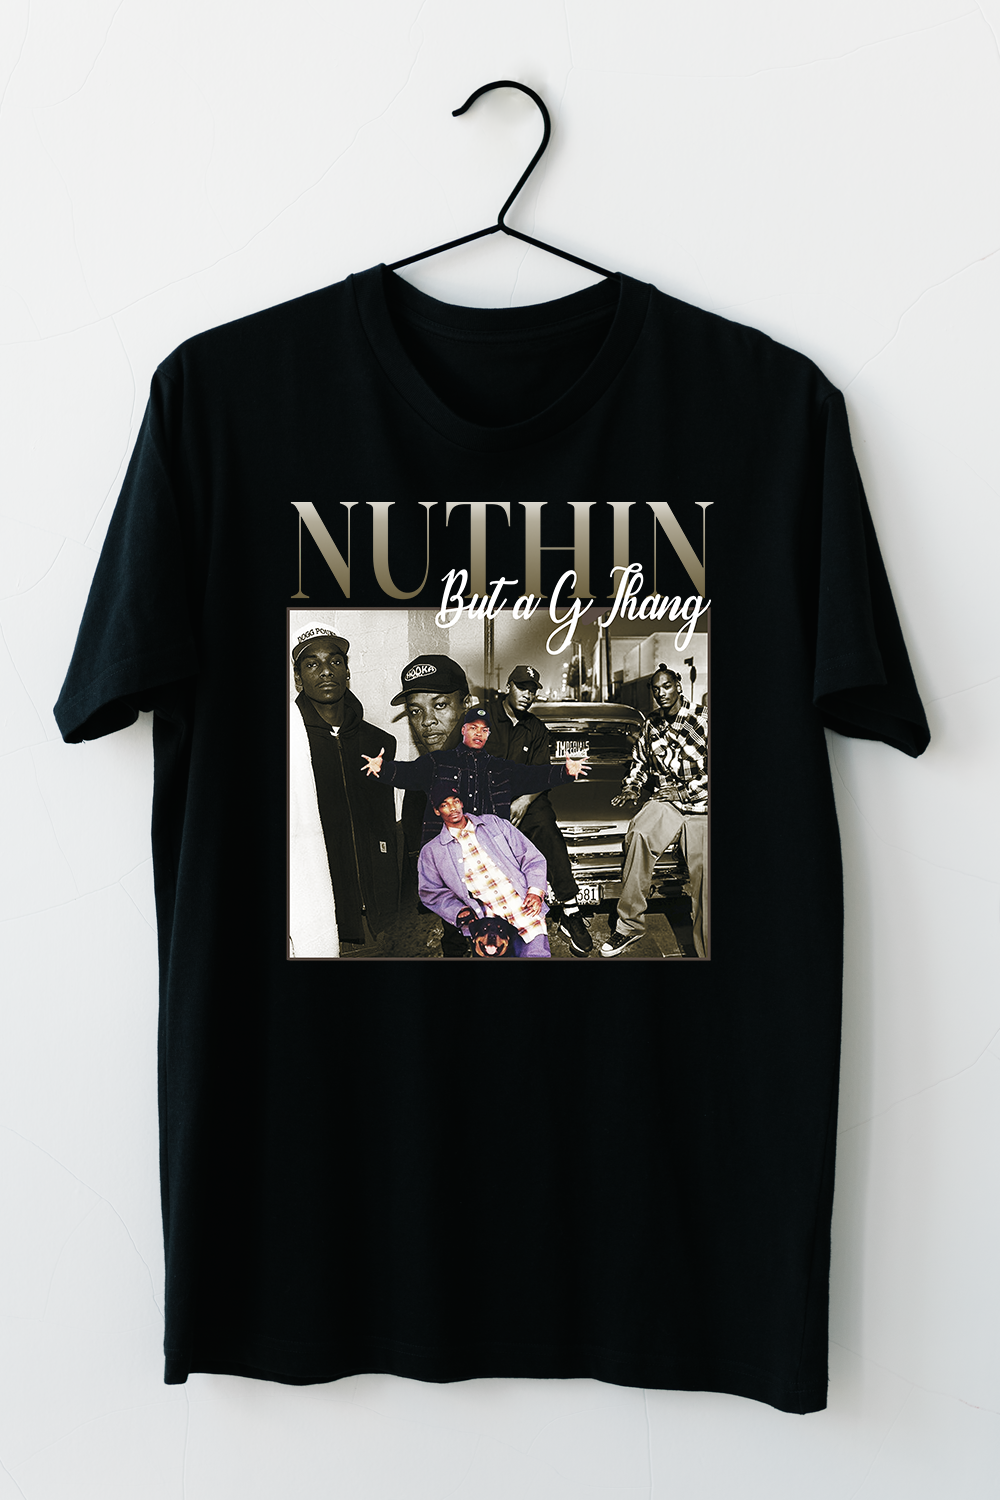 Nuthin But a G Thang T-Shirt, Snoop Dogg, Dr Dre Classic 90s